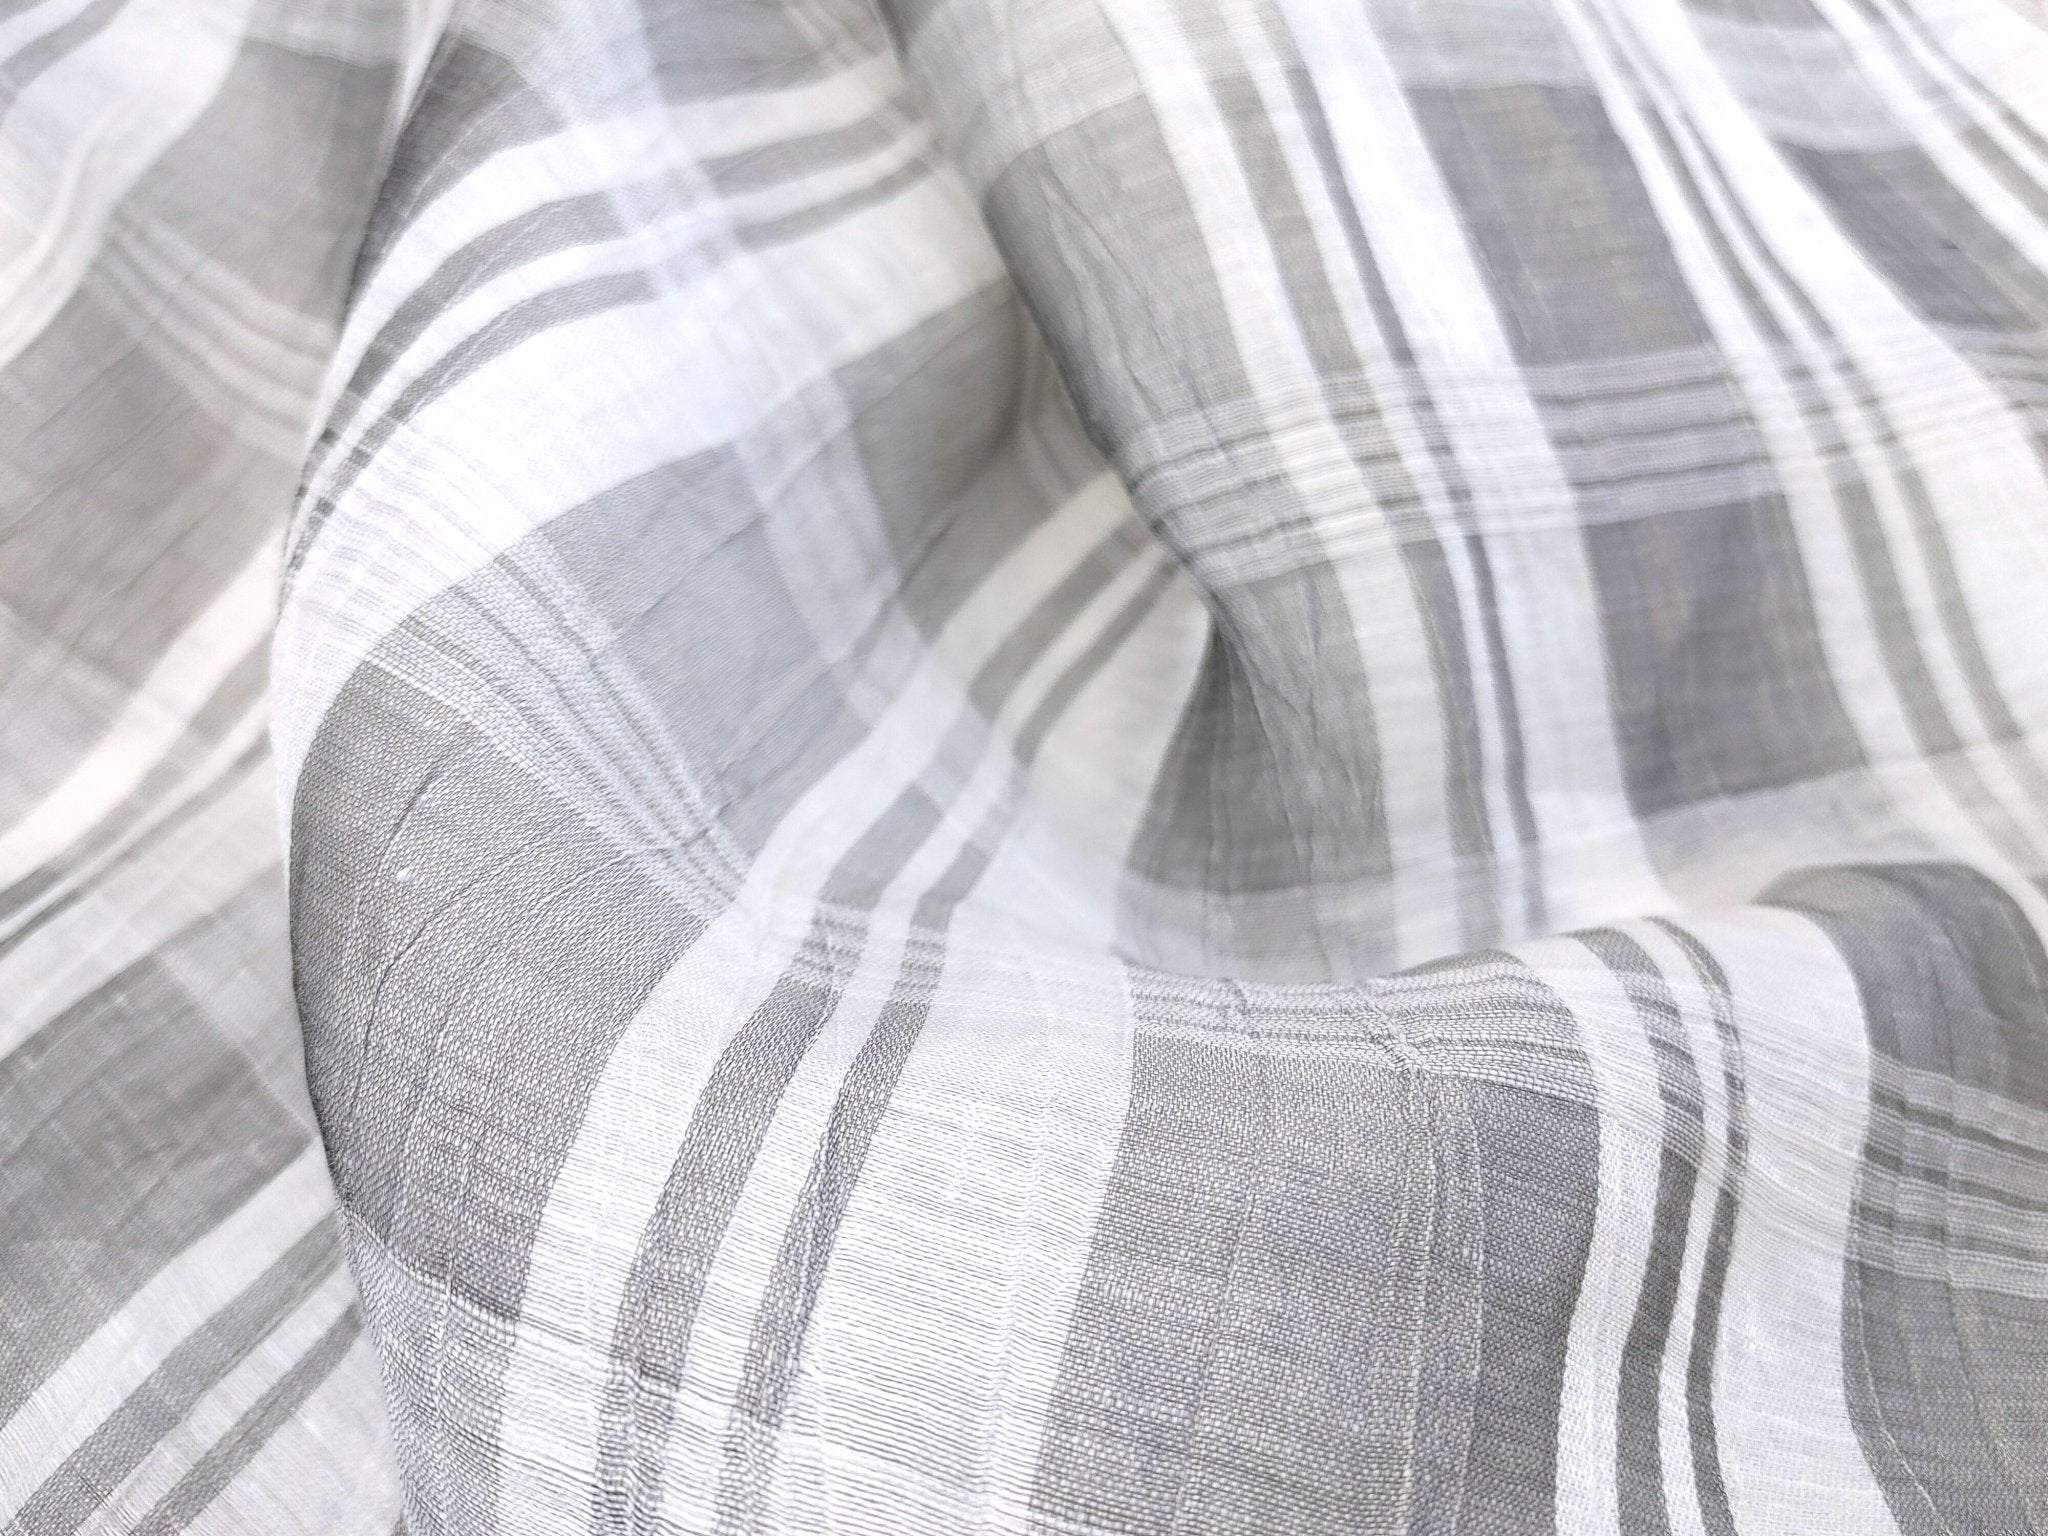 Linen Polyester Grey Plaid with Crease Wrinkle Effect Fabric 3525 - The Linen Lab - Gray